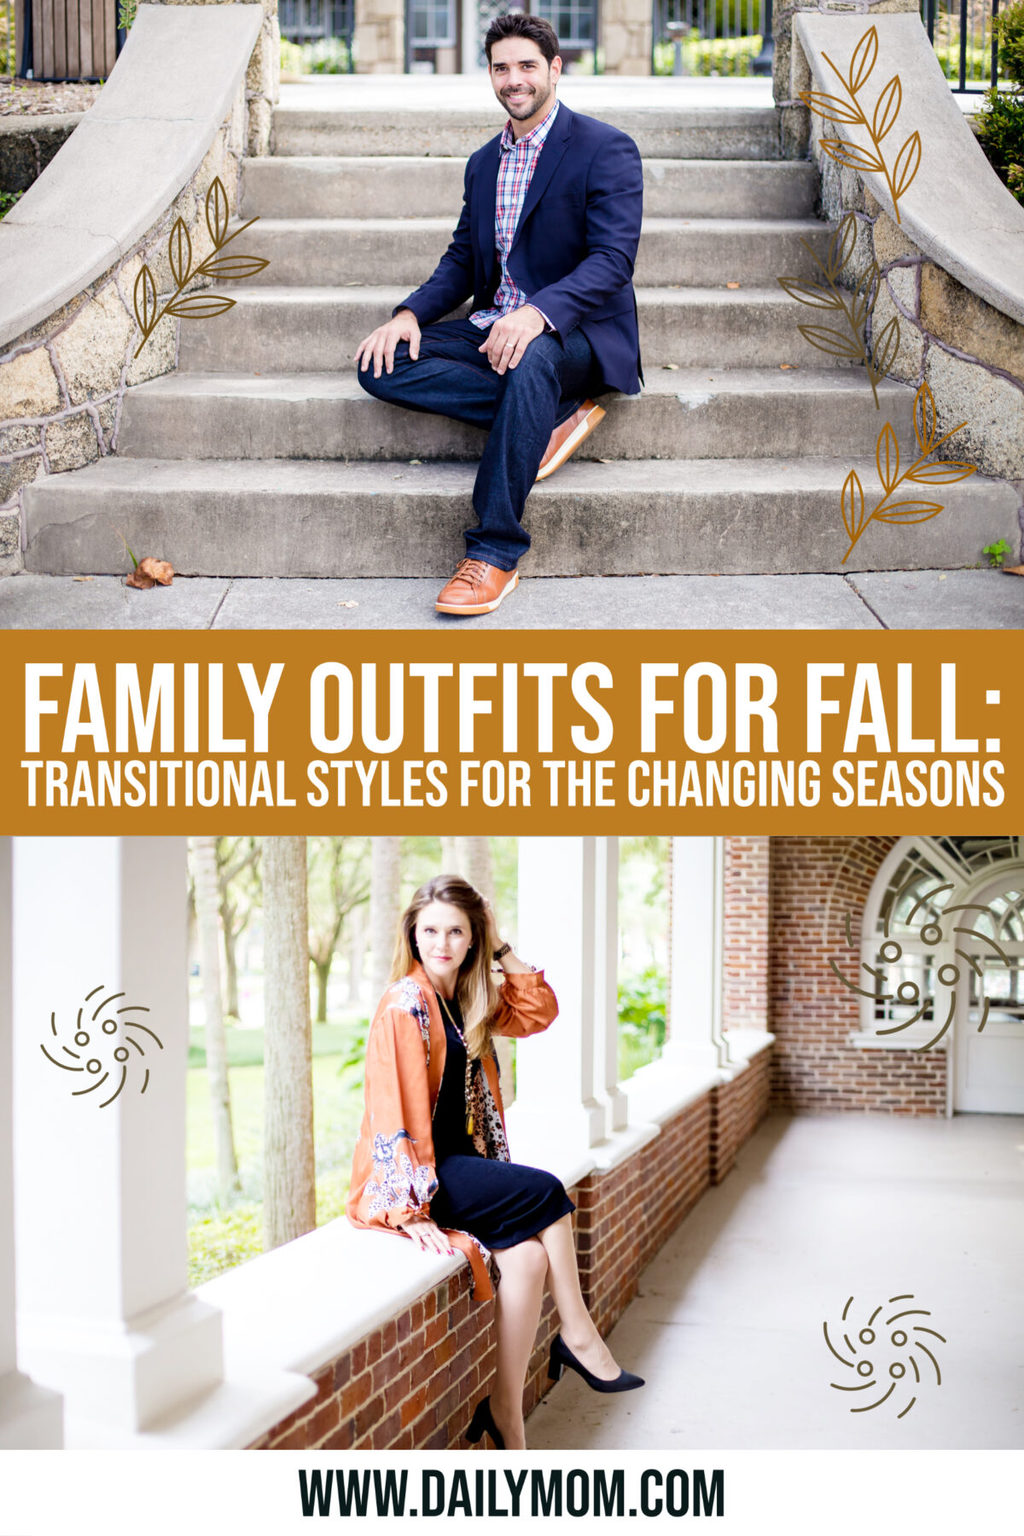 Family Fall Outfits: 15 Transitional Styles For The Changing Seasons Of Summer To Fall